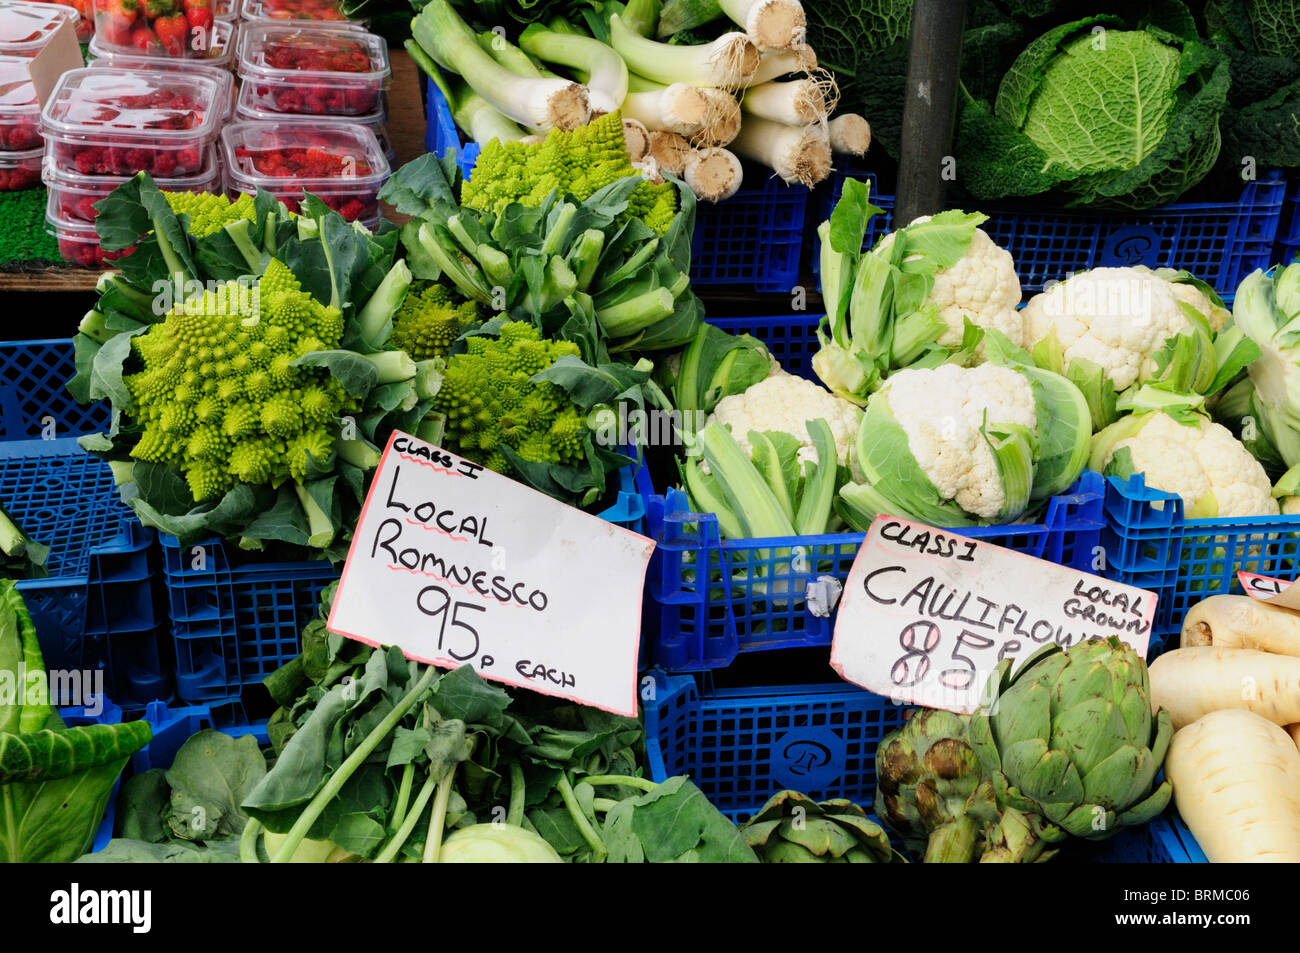 Vegetables including Romanesco Broccoli, and Cauliflowers on a market stall in Cambridge, England, UK Stock Photo